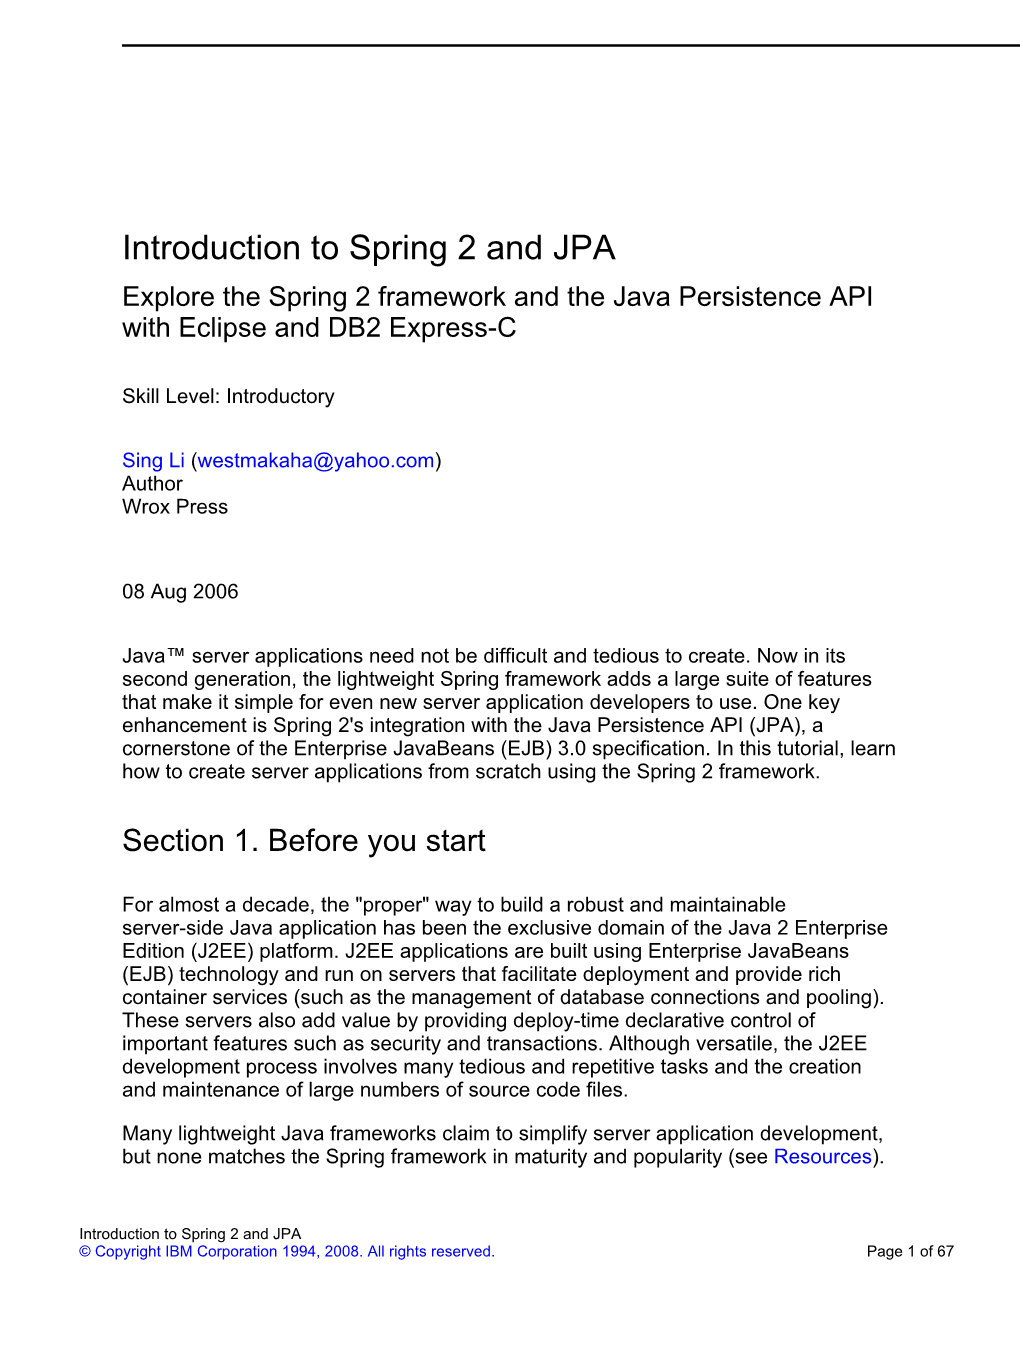 Introduction to Spring 2 and JPA Explore the Spring 2 Framework and the Java Persistence API with Eclipse and DB2 Express-C